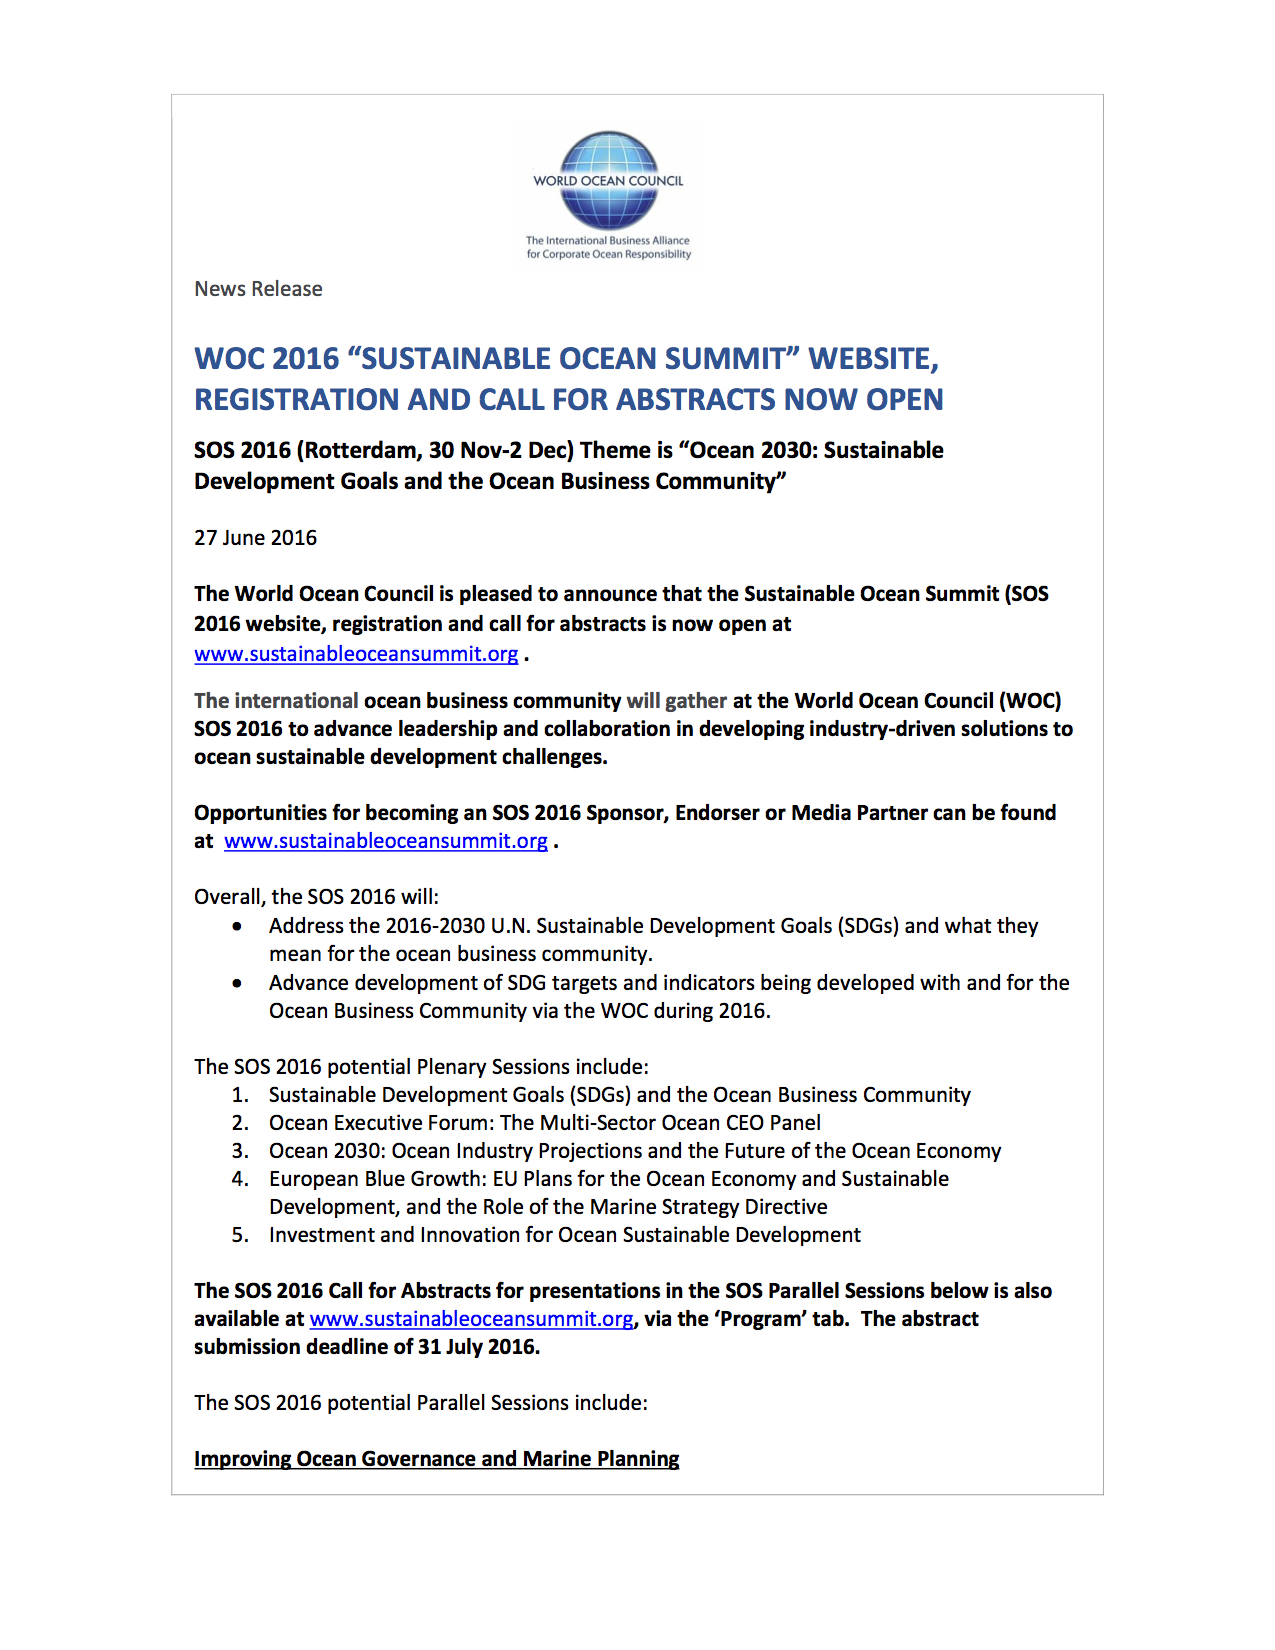 WOC News Release 2016-06-27-SOS-2016-Registration-and-Call-for-Abstracts-Open